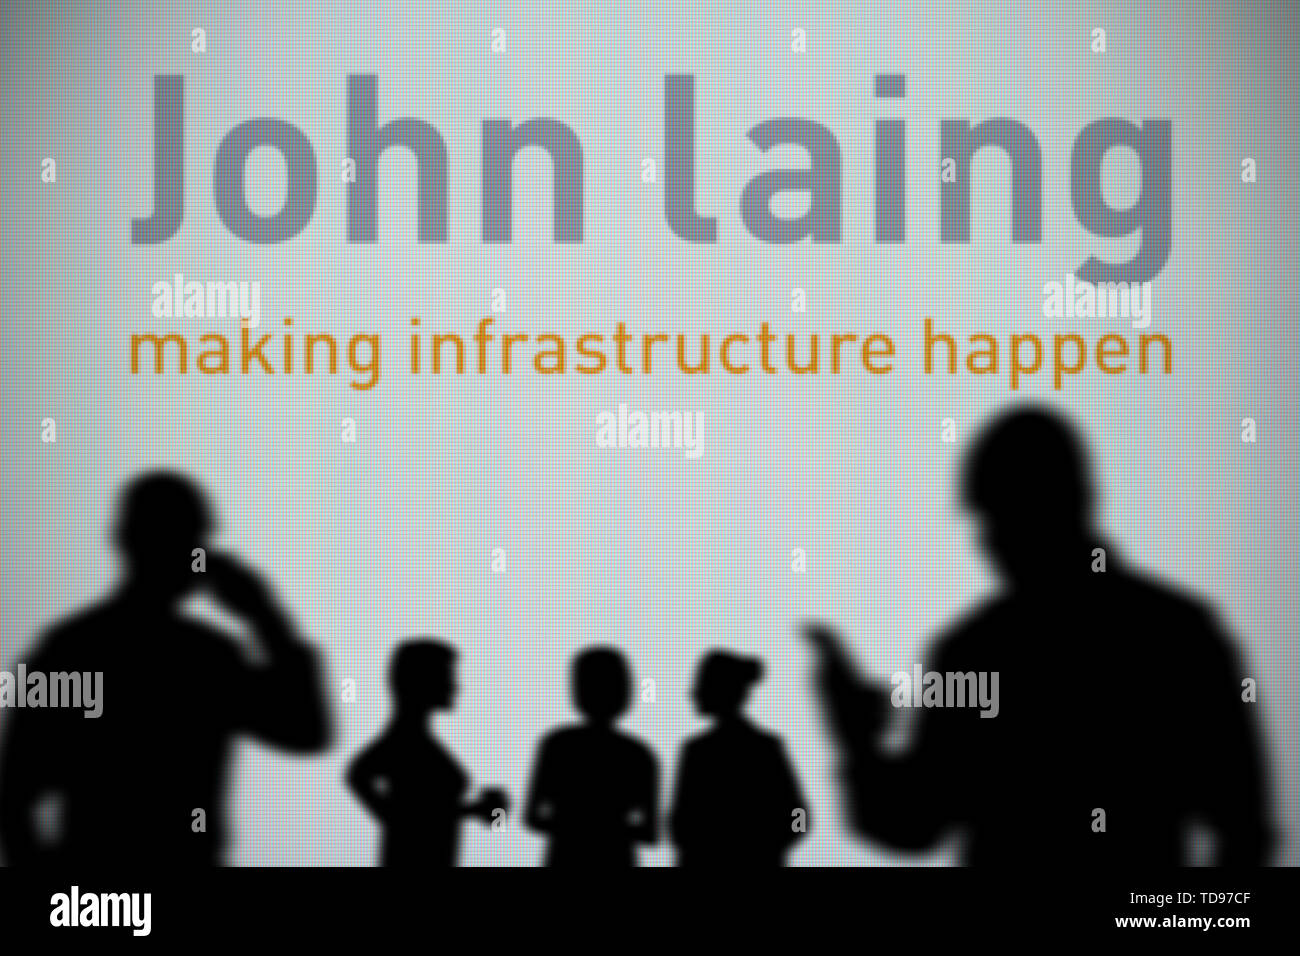 The John Laing logo is seen on an LED screen in the background while a silhouetted person uses a smartphone in the foreground (Editorial use only) Stock Photo